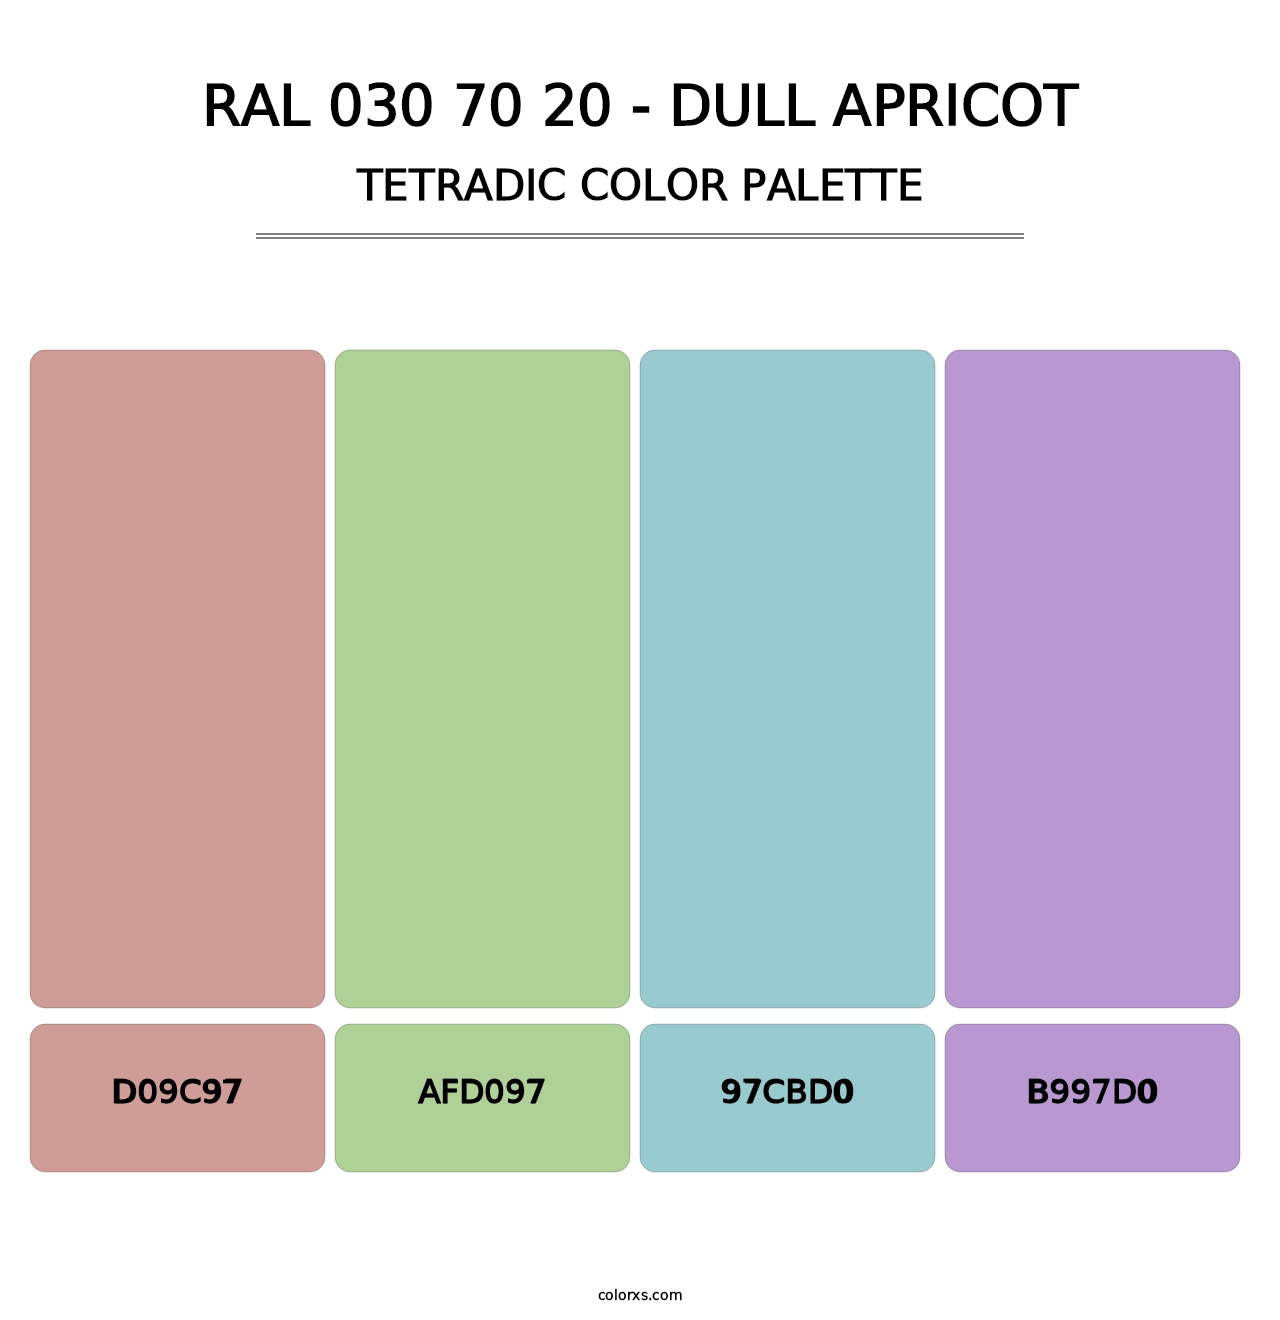 RAL 030 70 20 - Dull Apricot - Tetradic Color Palette